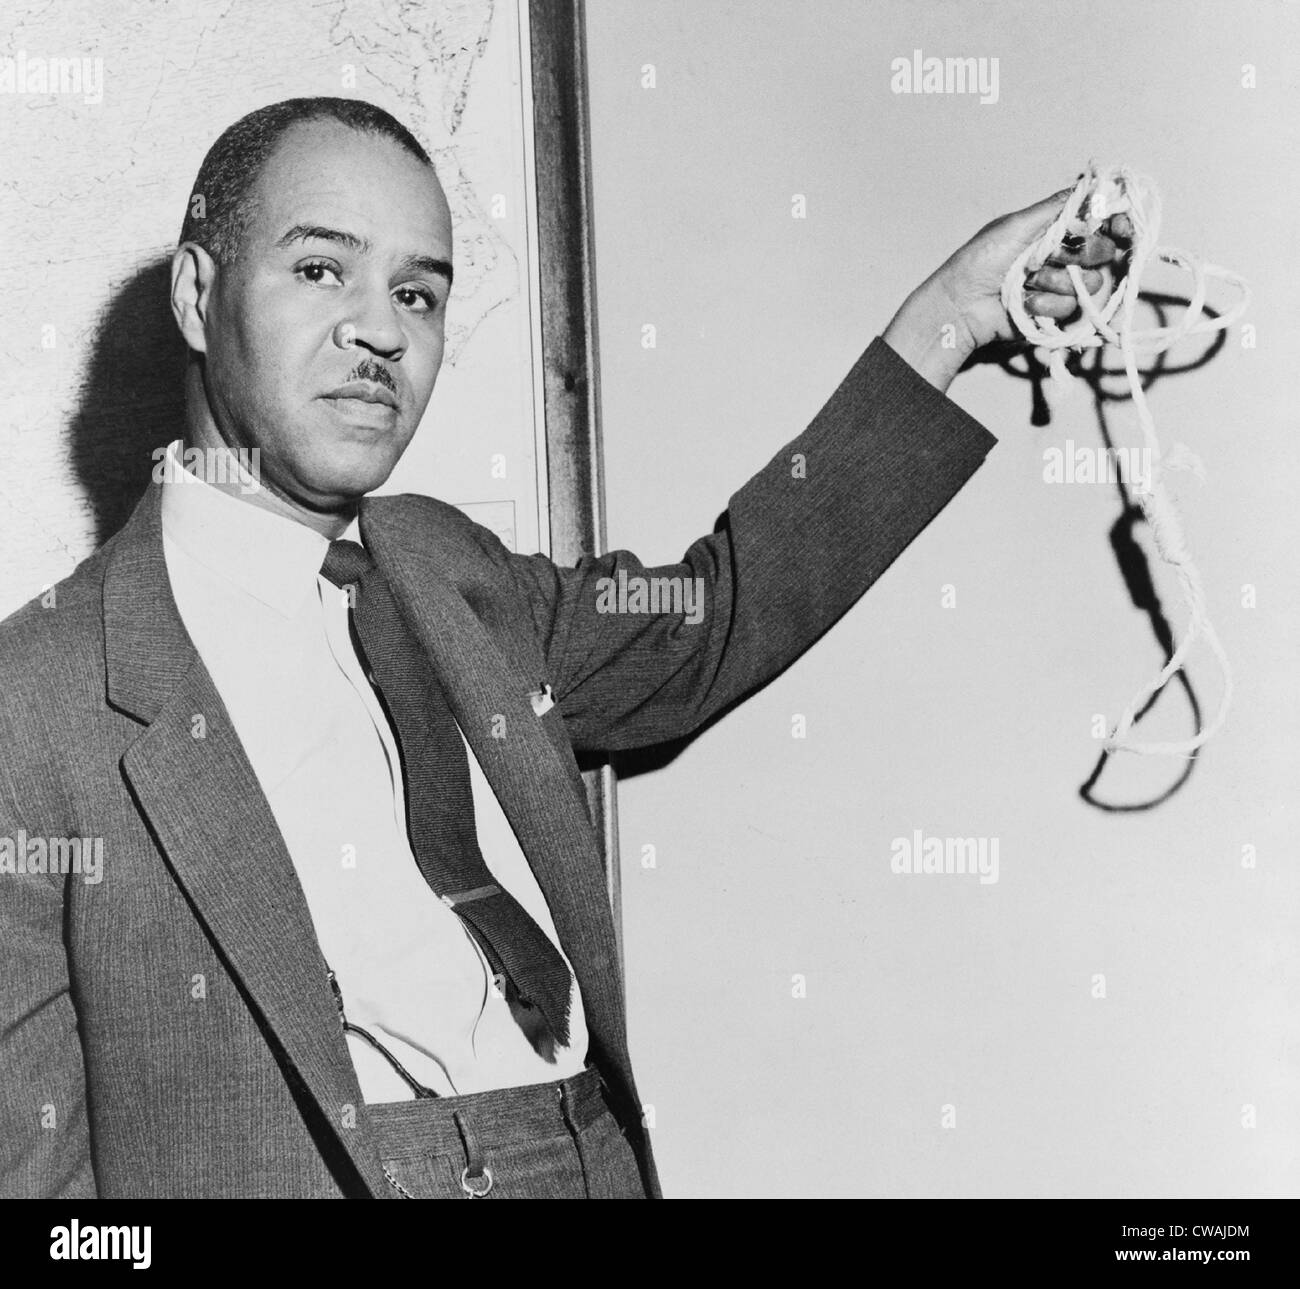 Roy Wilkins (1901-1981), NAACP executive secretary, displays hangman's noose sent to Association's national headquarters from Stock Photo